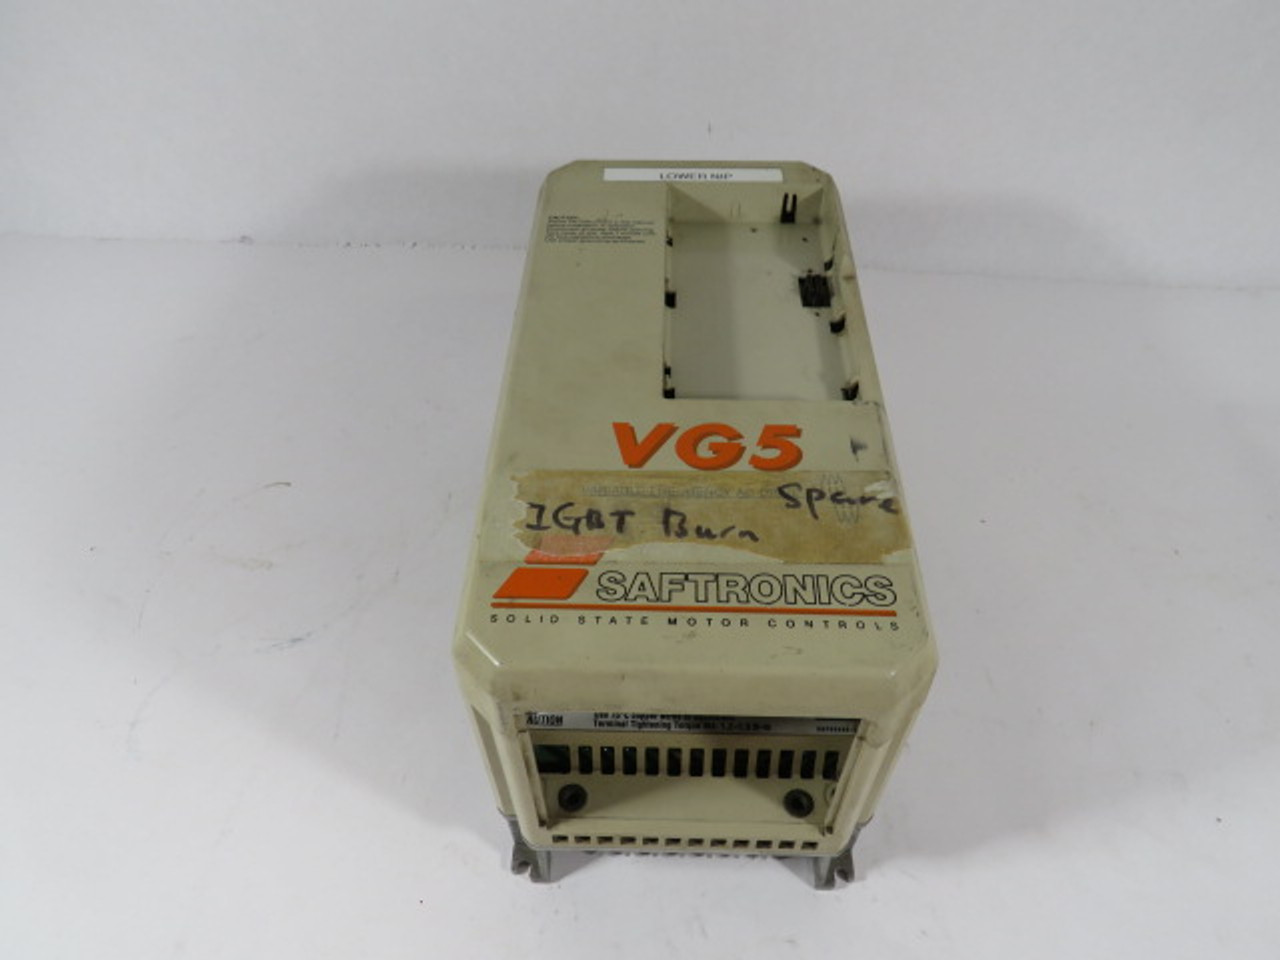 Saftronics CIMR-G5U40P7 Variable Frequency Drive *Burned-out Board* ! AS IS !